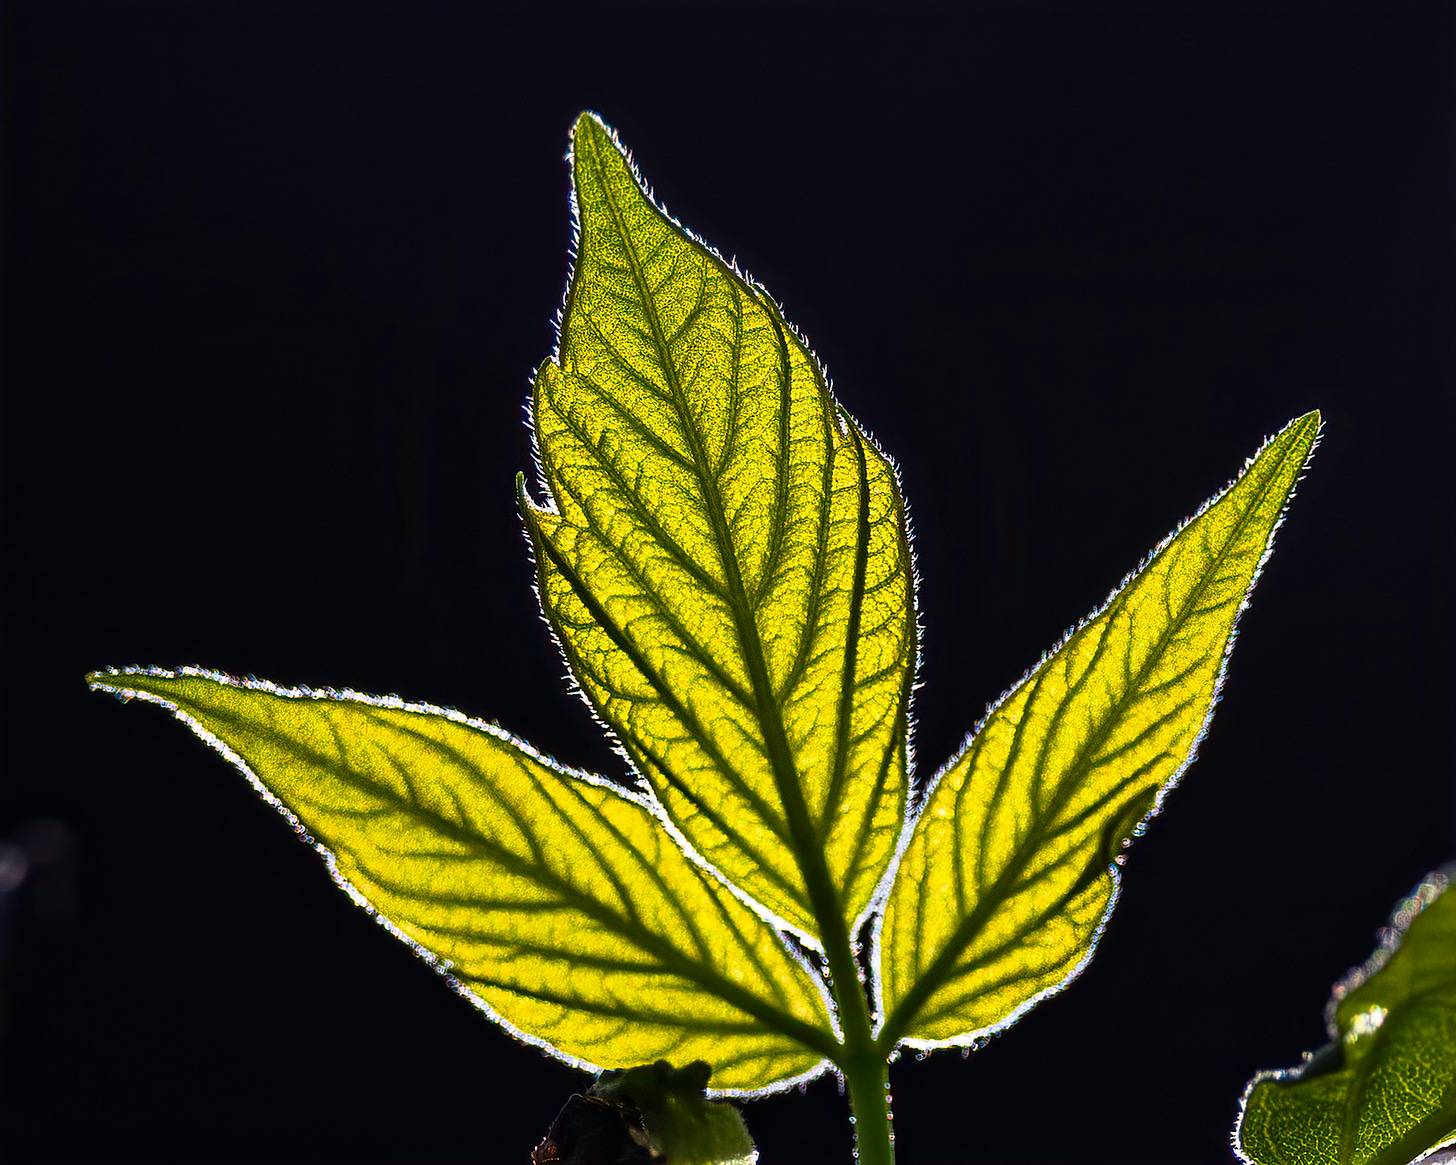 This photo shows a backlit boxelder leaf. The background is solid black, and the leaf is a greenish yellow with dark green veins.